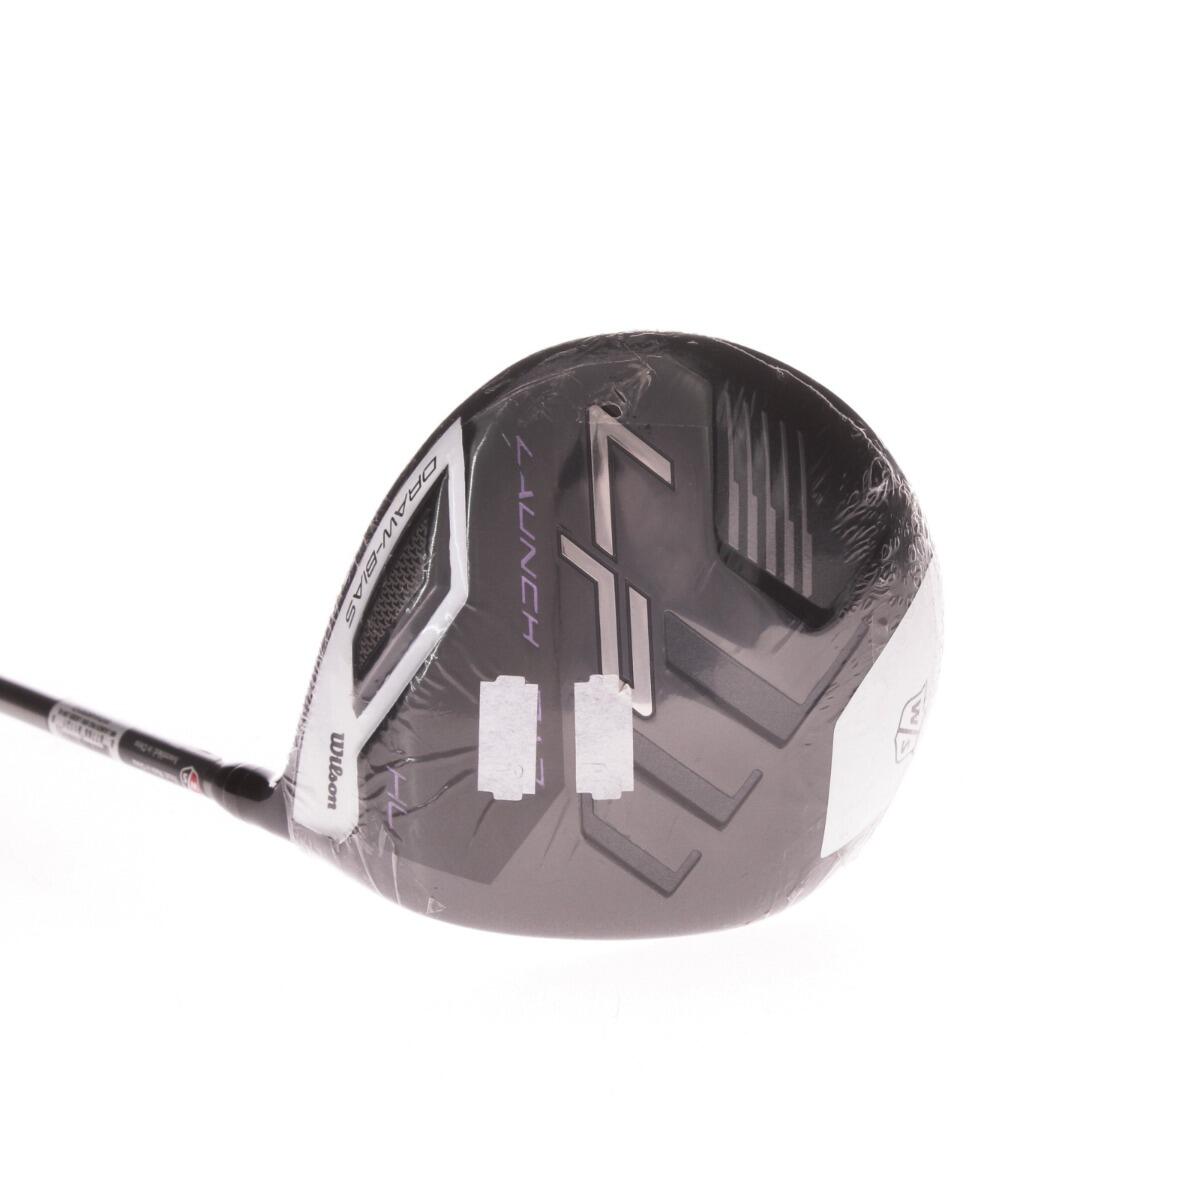 USED - Driver Wilson Staff Launch Pad HL Graphite Ladies Right Handed - GRADE B 2/7